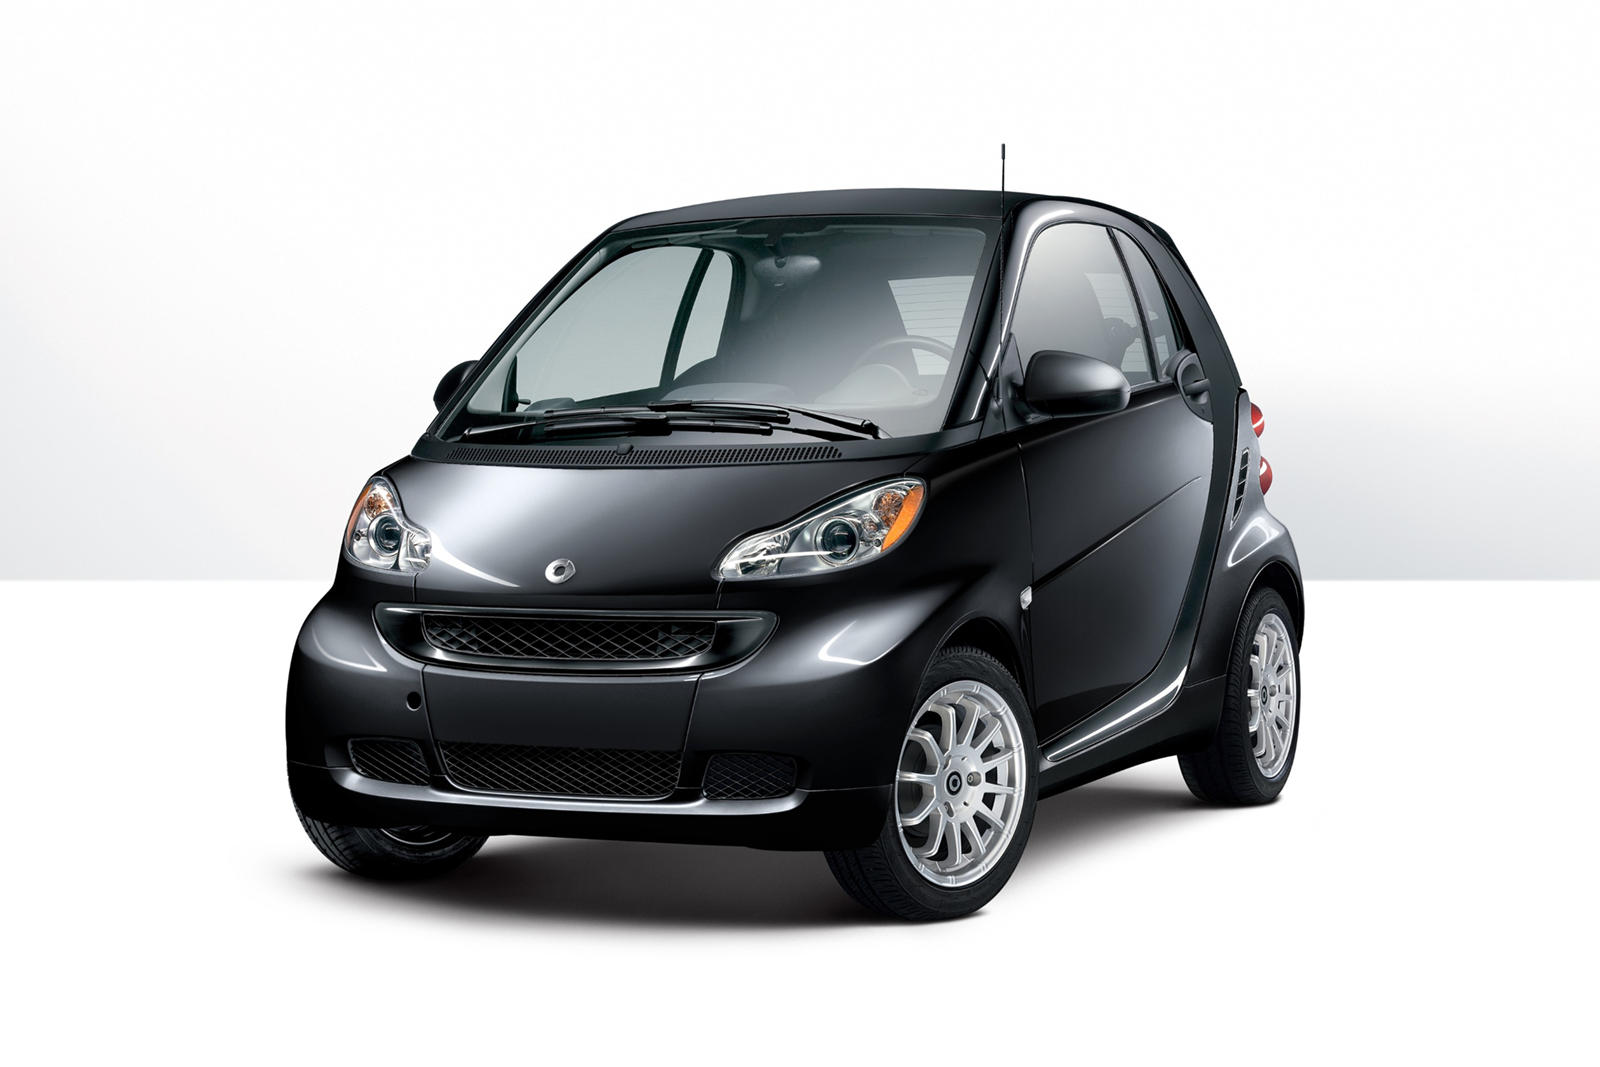 2012 smart fortwo: Review, Trims, Specs, Price, New Interior Features,  Exterior Design, and Specifications